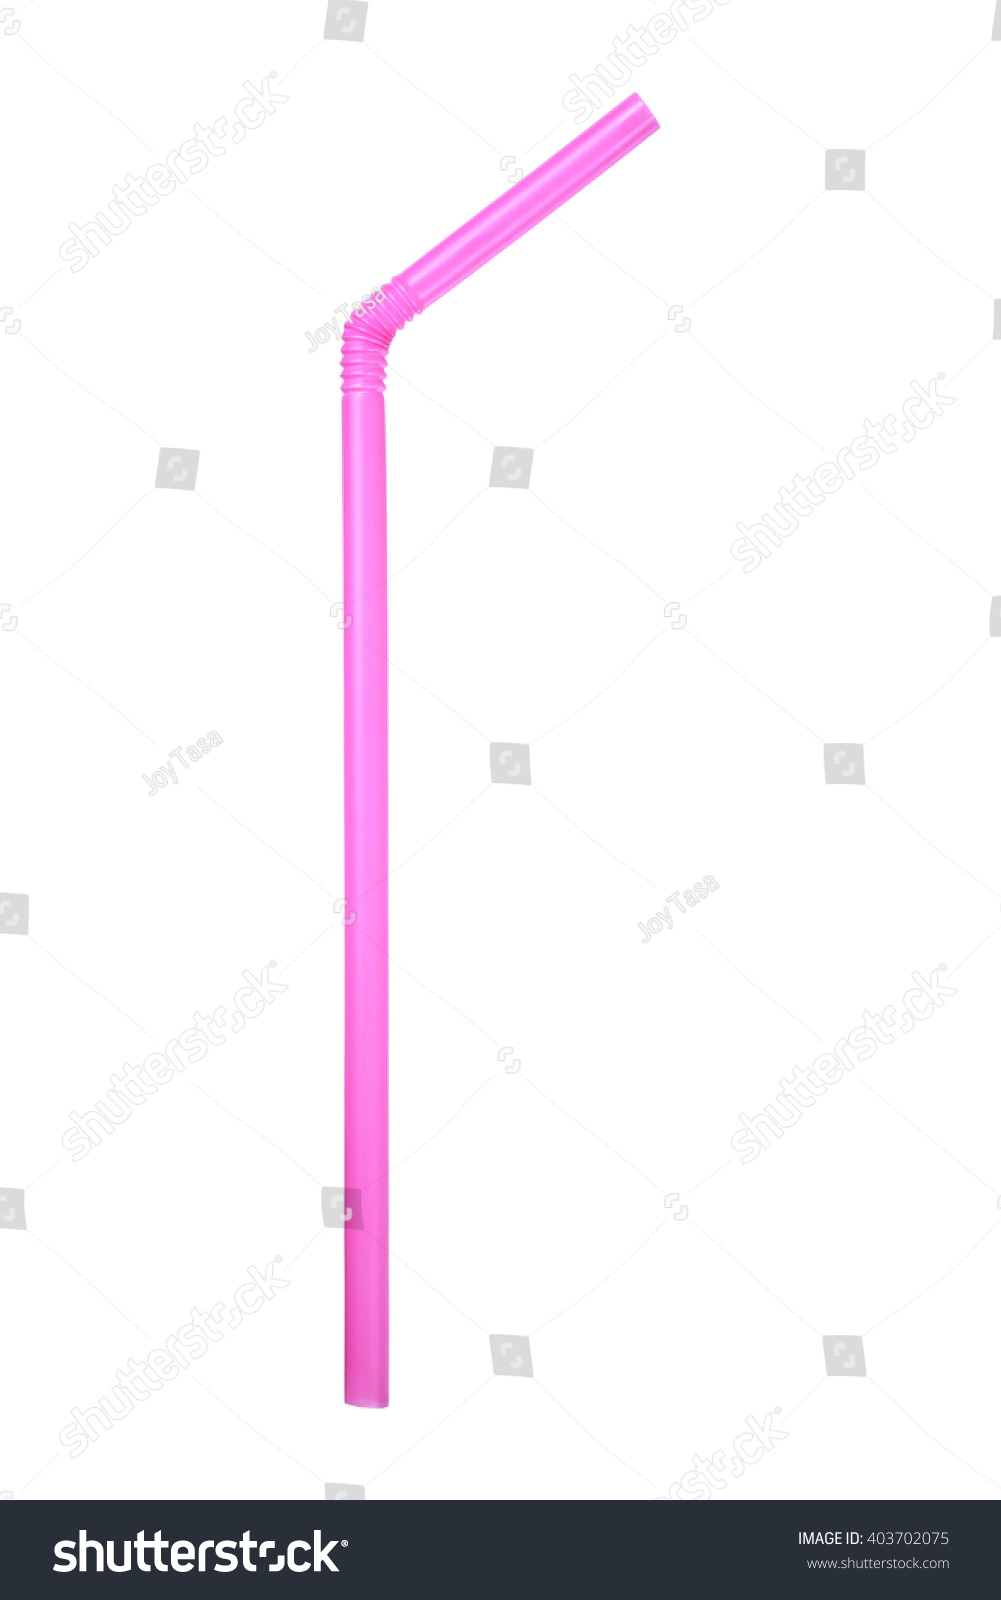 It is One pink straw isolated on white. #403702075